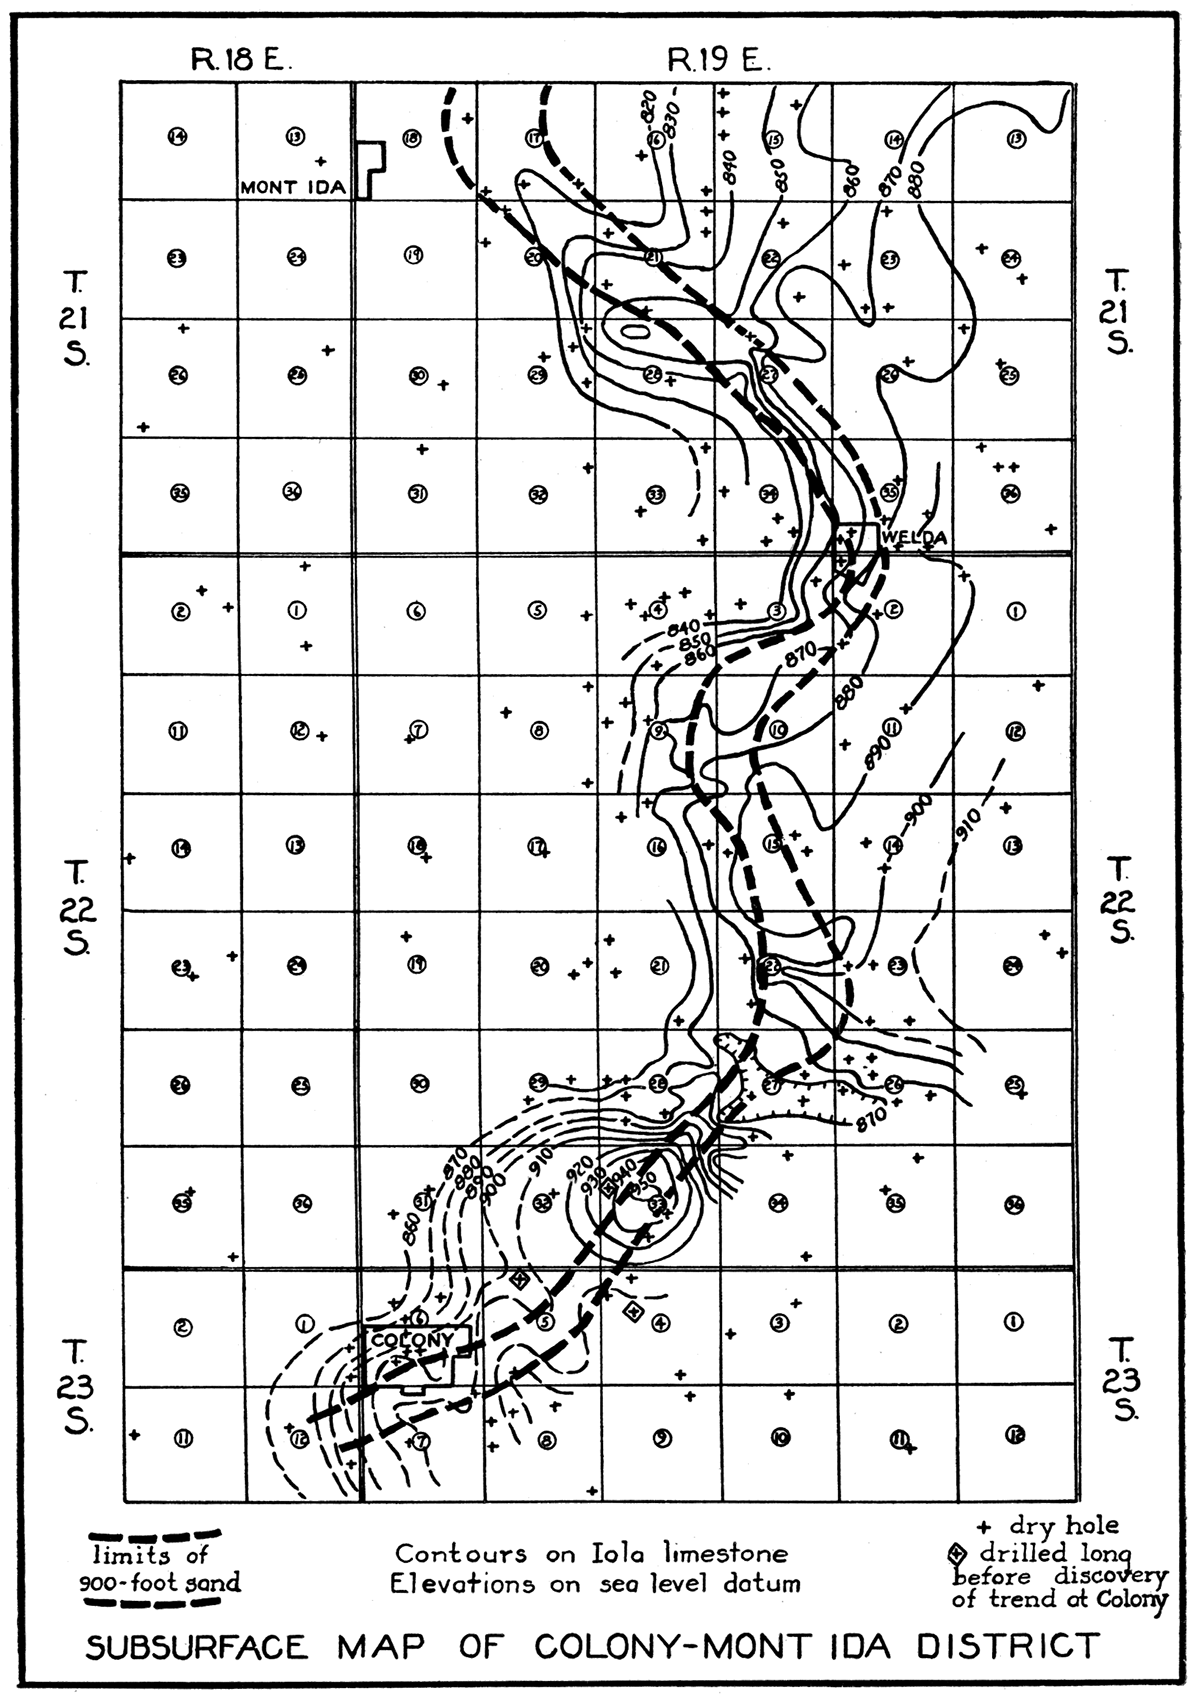 Subsurface structural map of the Colony-Mont Ida district.